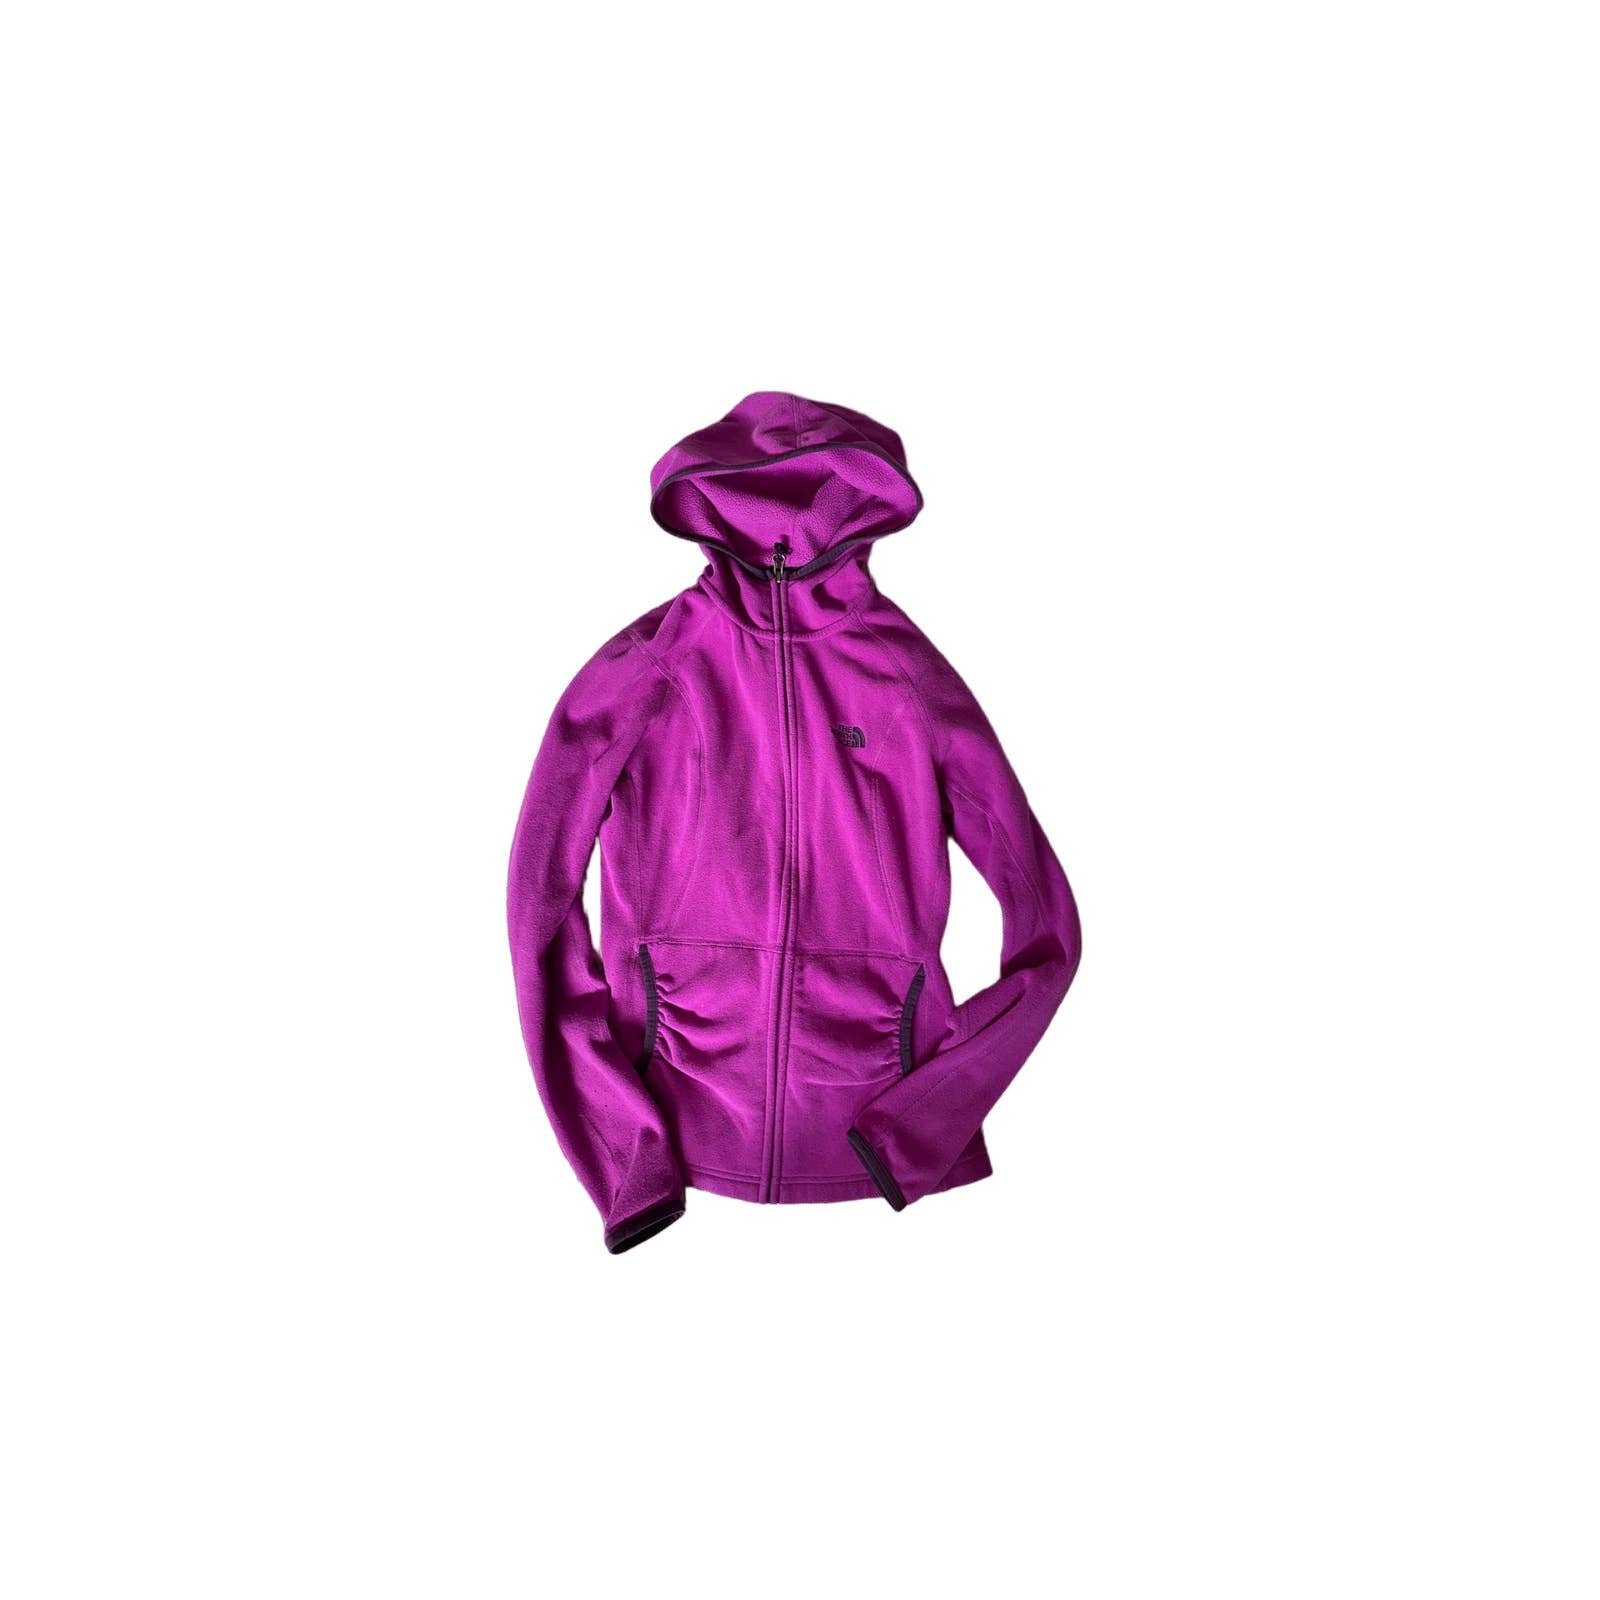 the Lowest price North Face Womens Purple Fleece Jacket